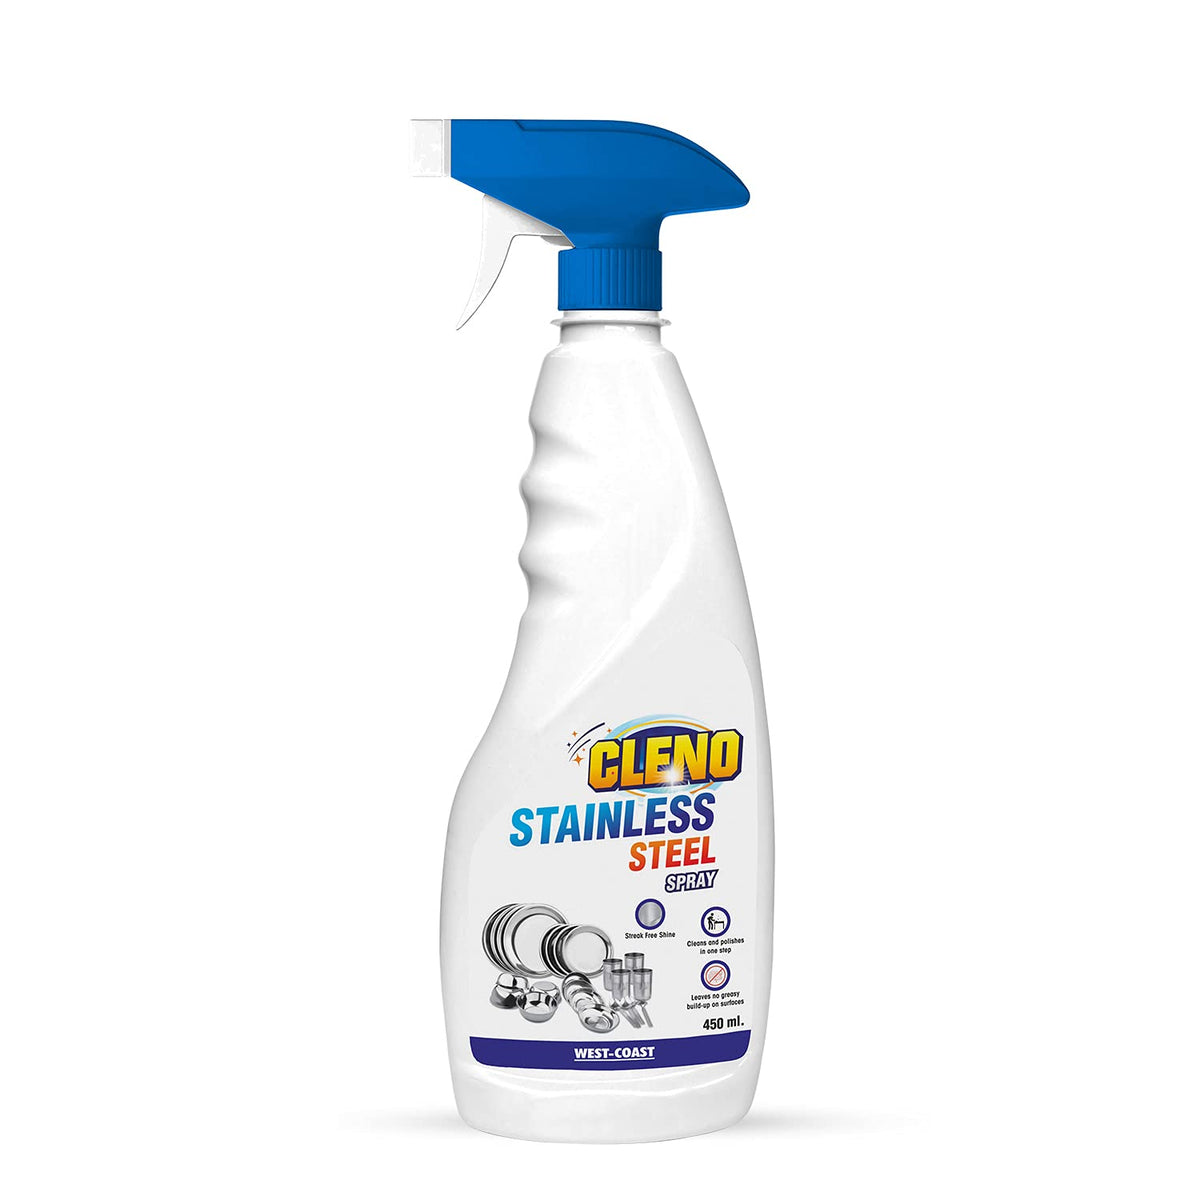 Cleno Stainless Steel Cleaner Spray Cleans Stainless Steel Surfaces/Stainless Steel Bottle/Kitchen Stainless Steel Appliances/Countertops- 450 ml (Ready to Use)